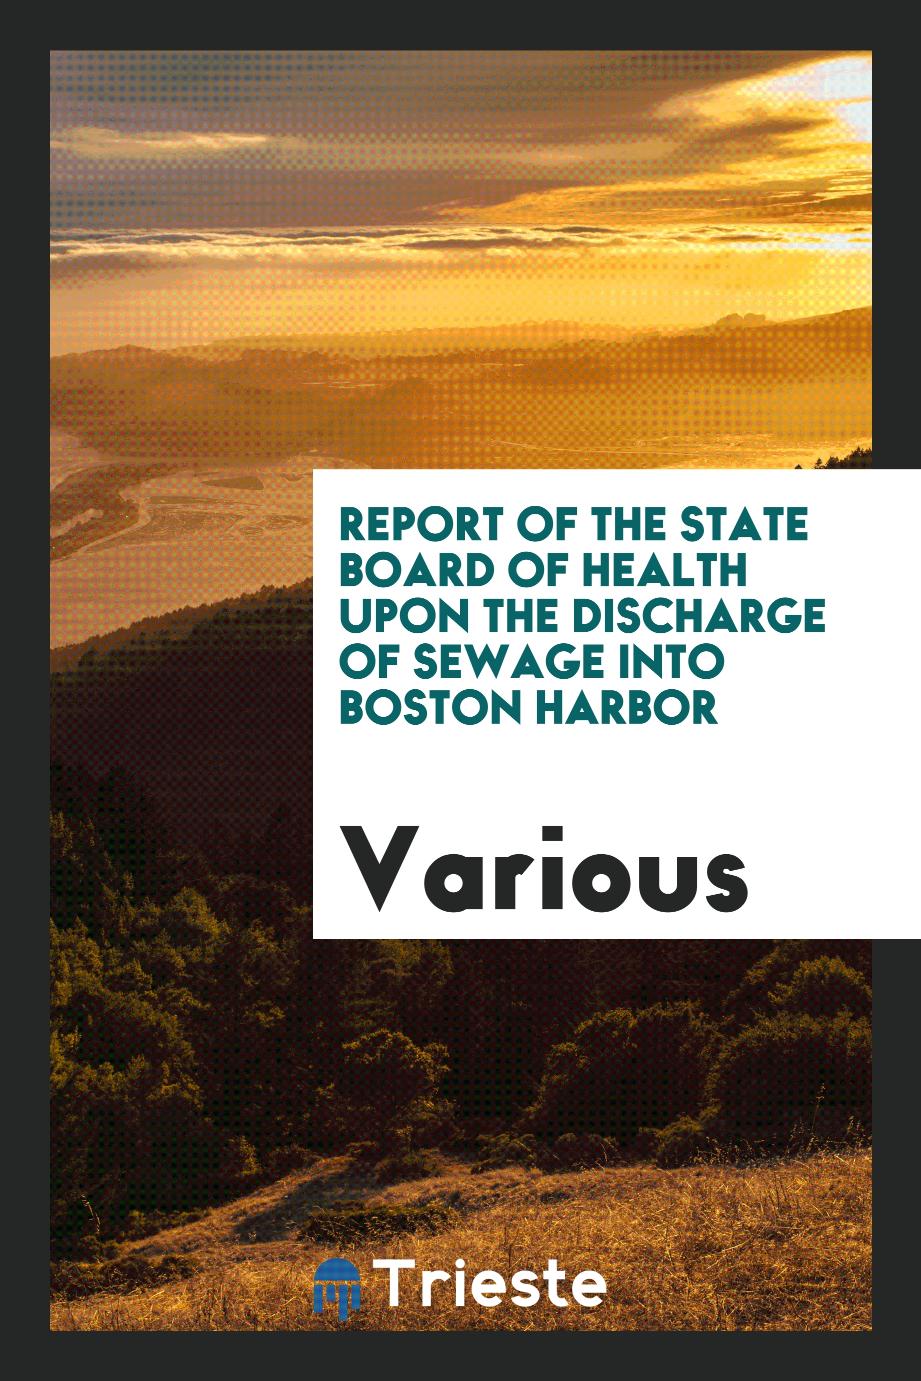 Report of the State Board of Health Upon the Discharge of Sewage Into Boston Harbor